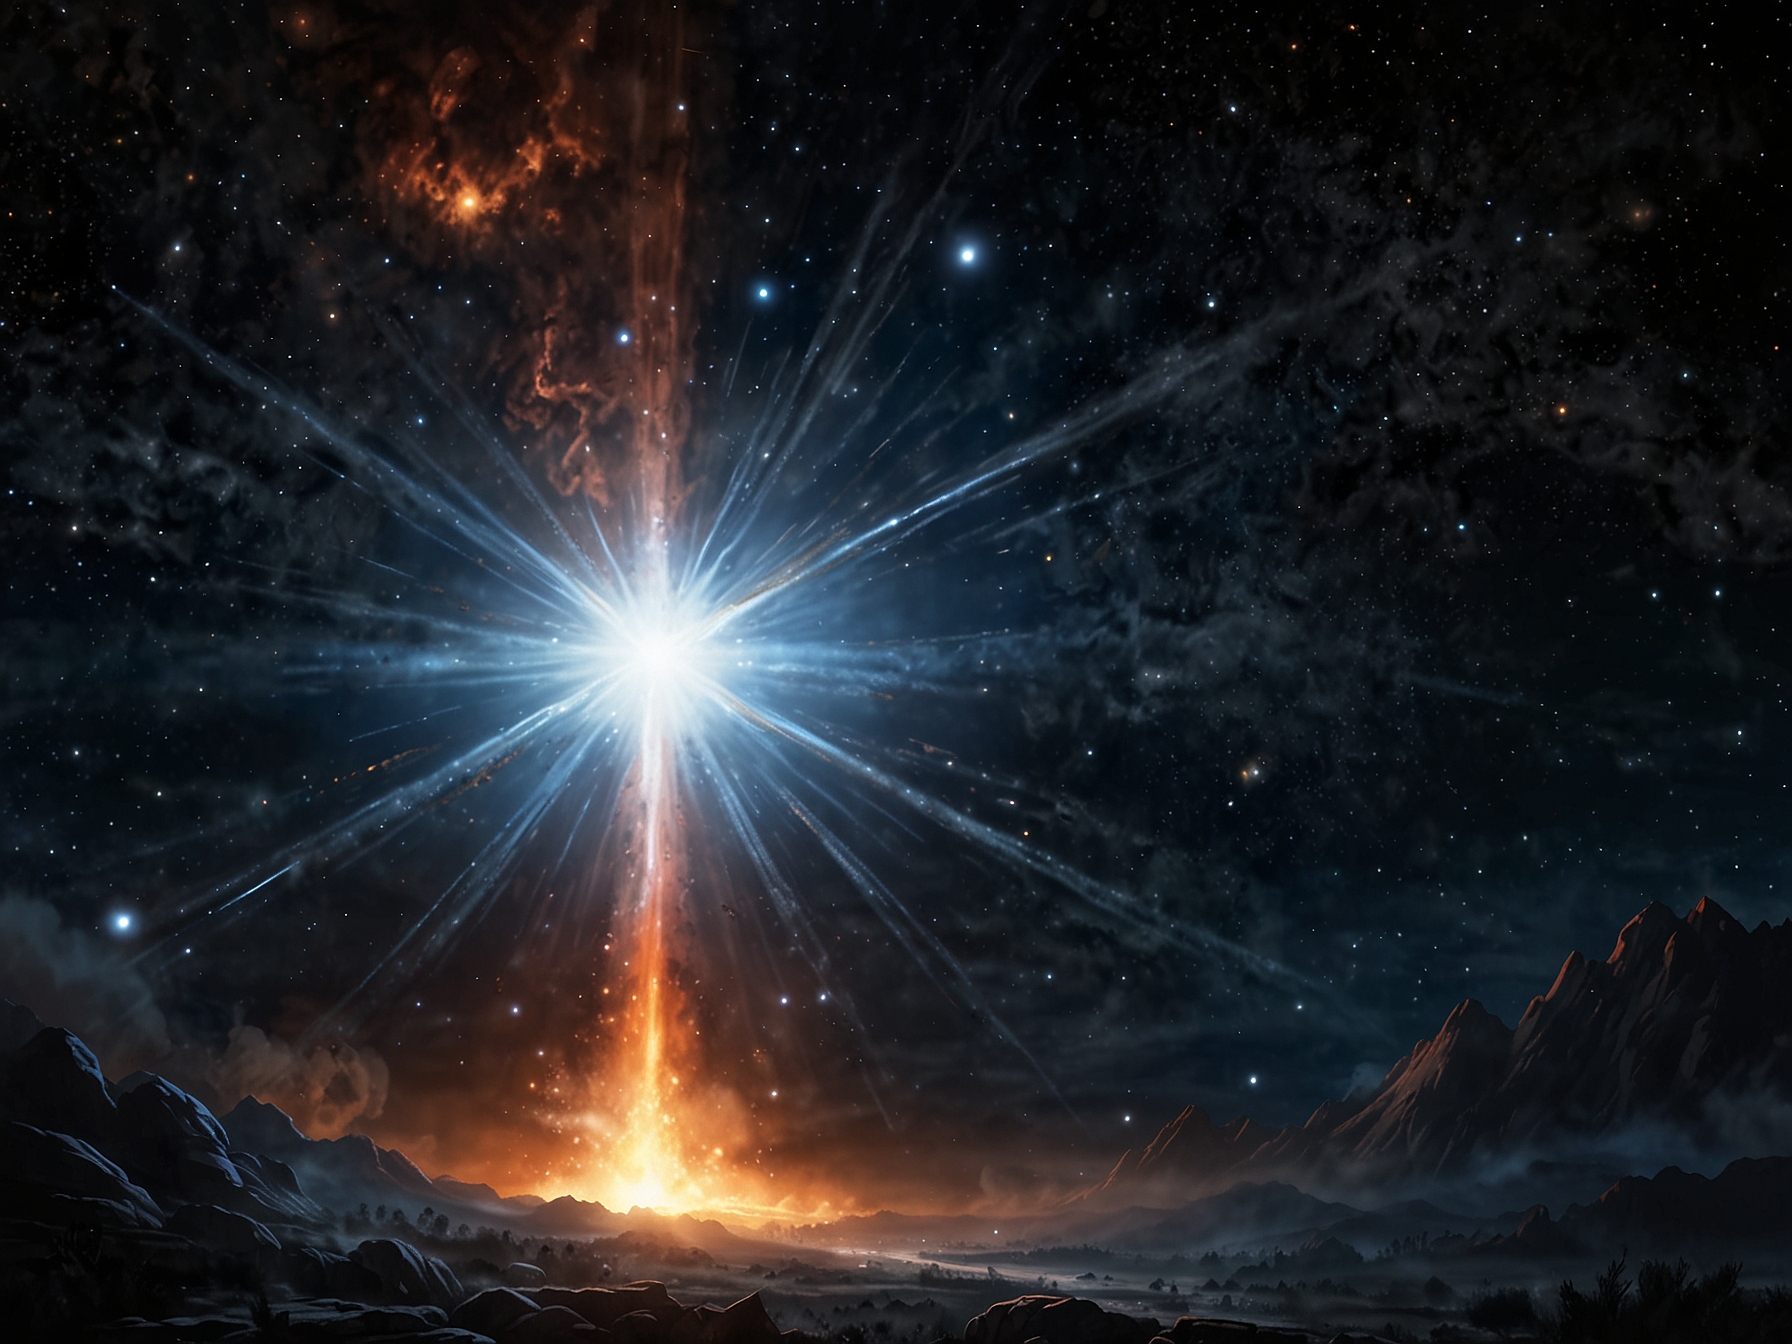 An illustration of a white dwarf star in a binary system, accumulating material from its companion star before erupting into a brilliant nova explosion, lighting up the night sky.